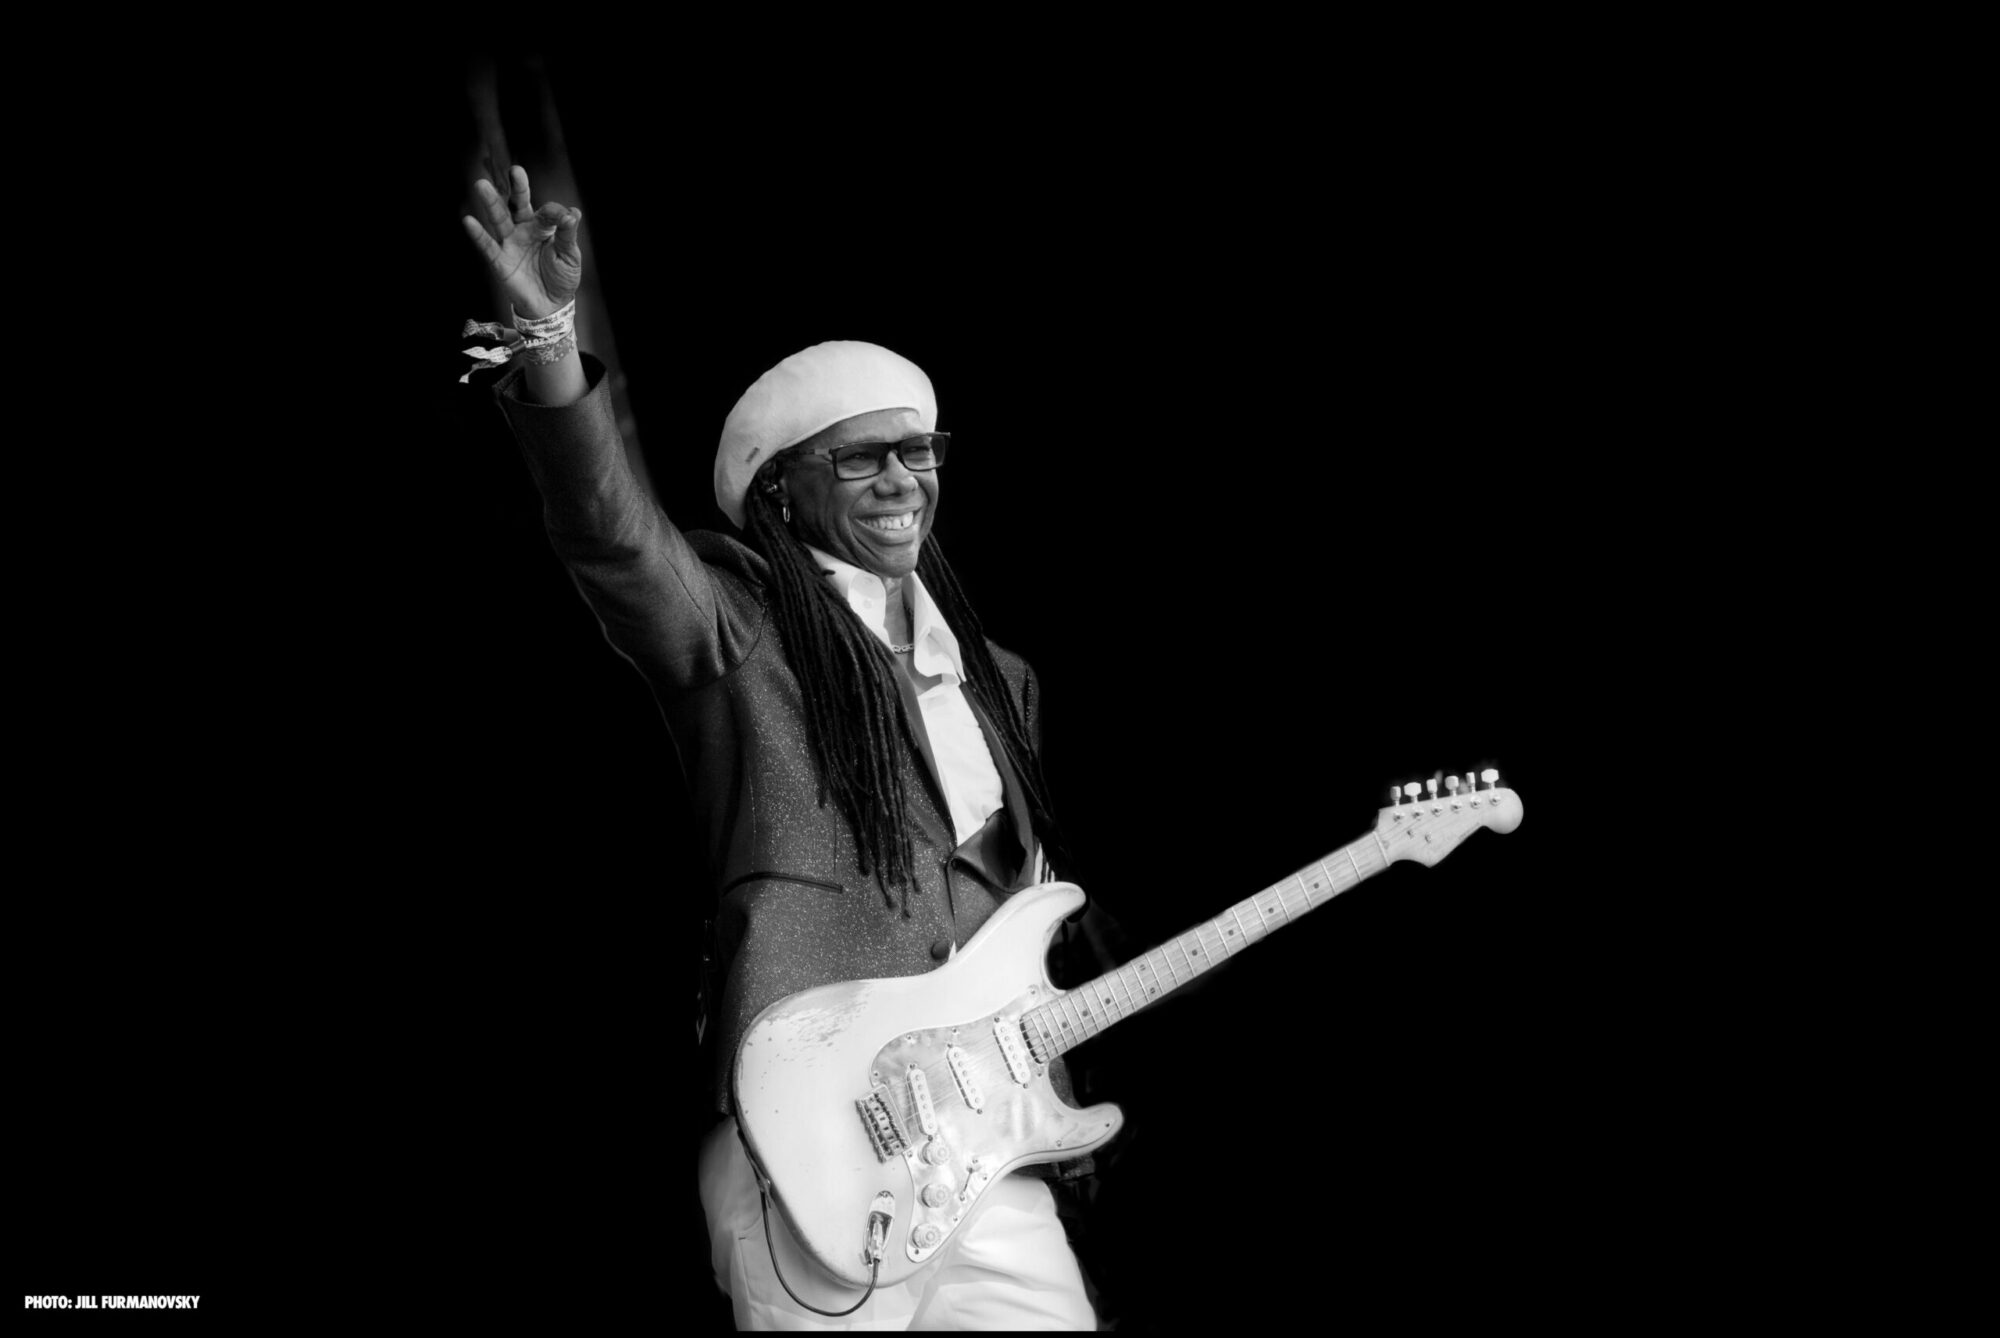 Image name Nile Rodgers and CHIC Official Ticket and Hotel Packages at Dalby Forest Yorkshire scaled the 1 image from the post Nile Rodgers and CHIC - Official Ticket and Hotel Packages at The Piece Hall, Halifax in Yorkshire.com.